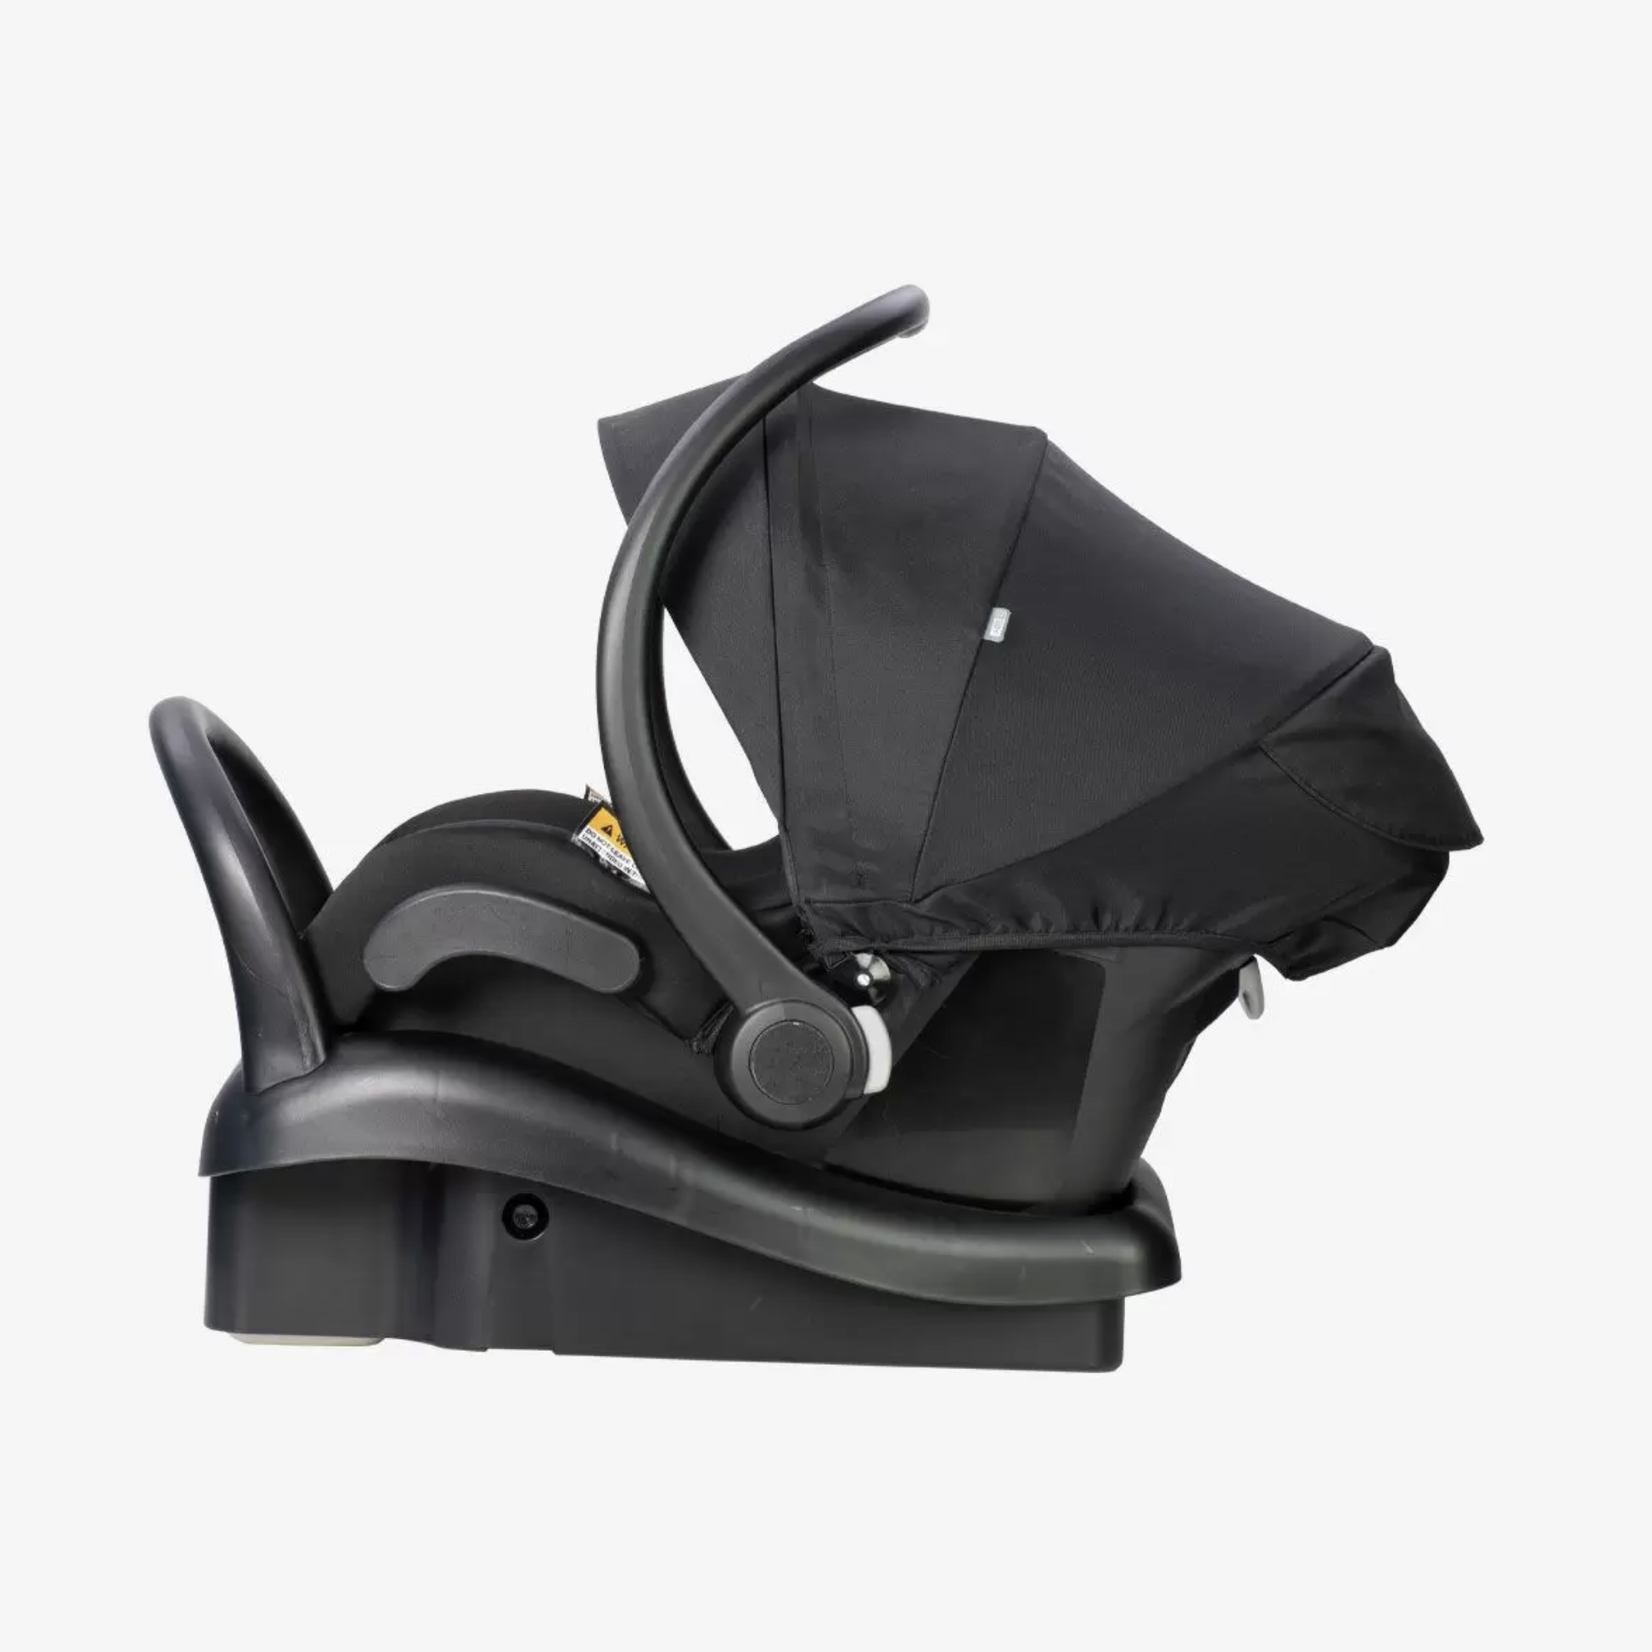 Mother's Choice Baby Capsule-Black